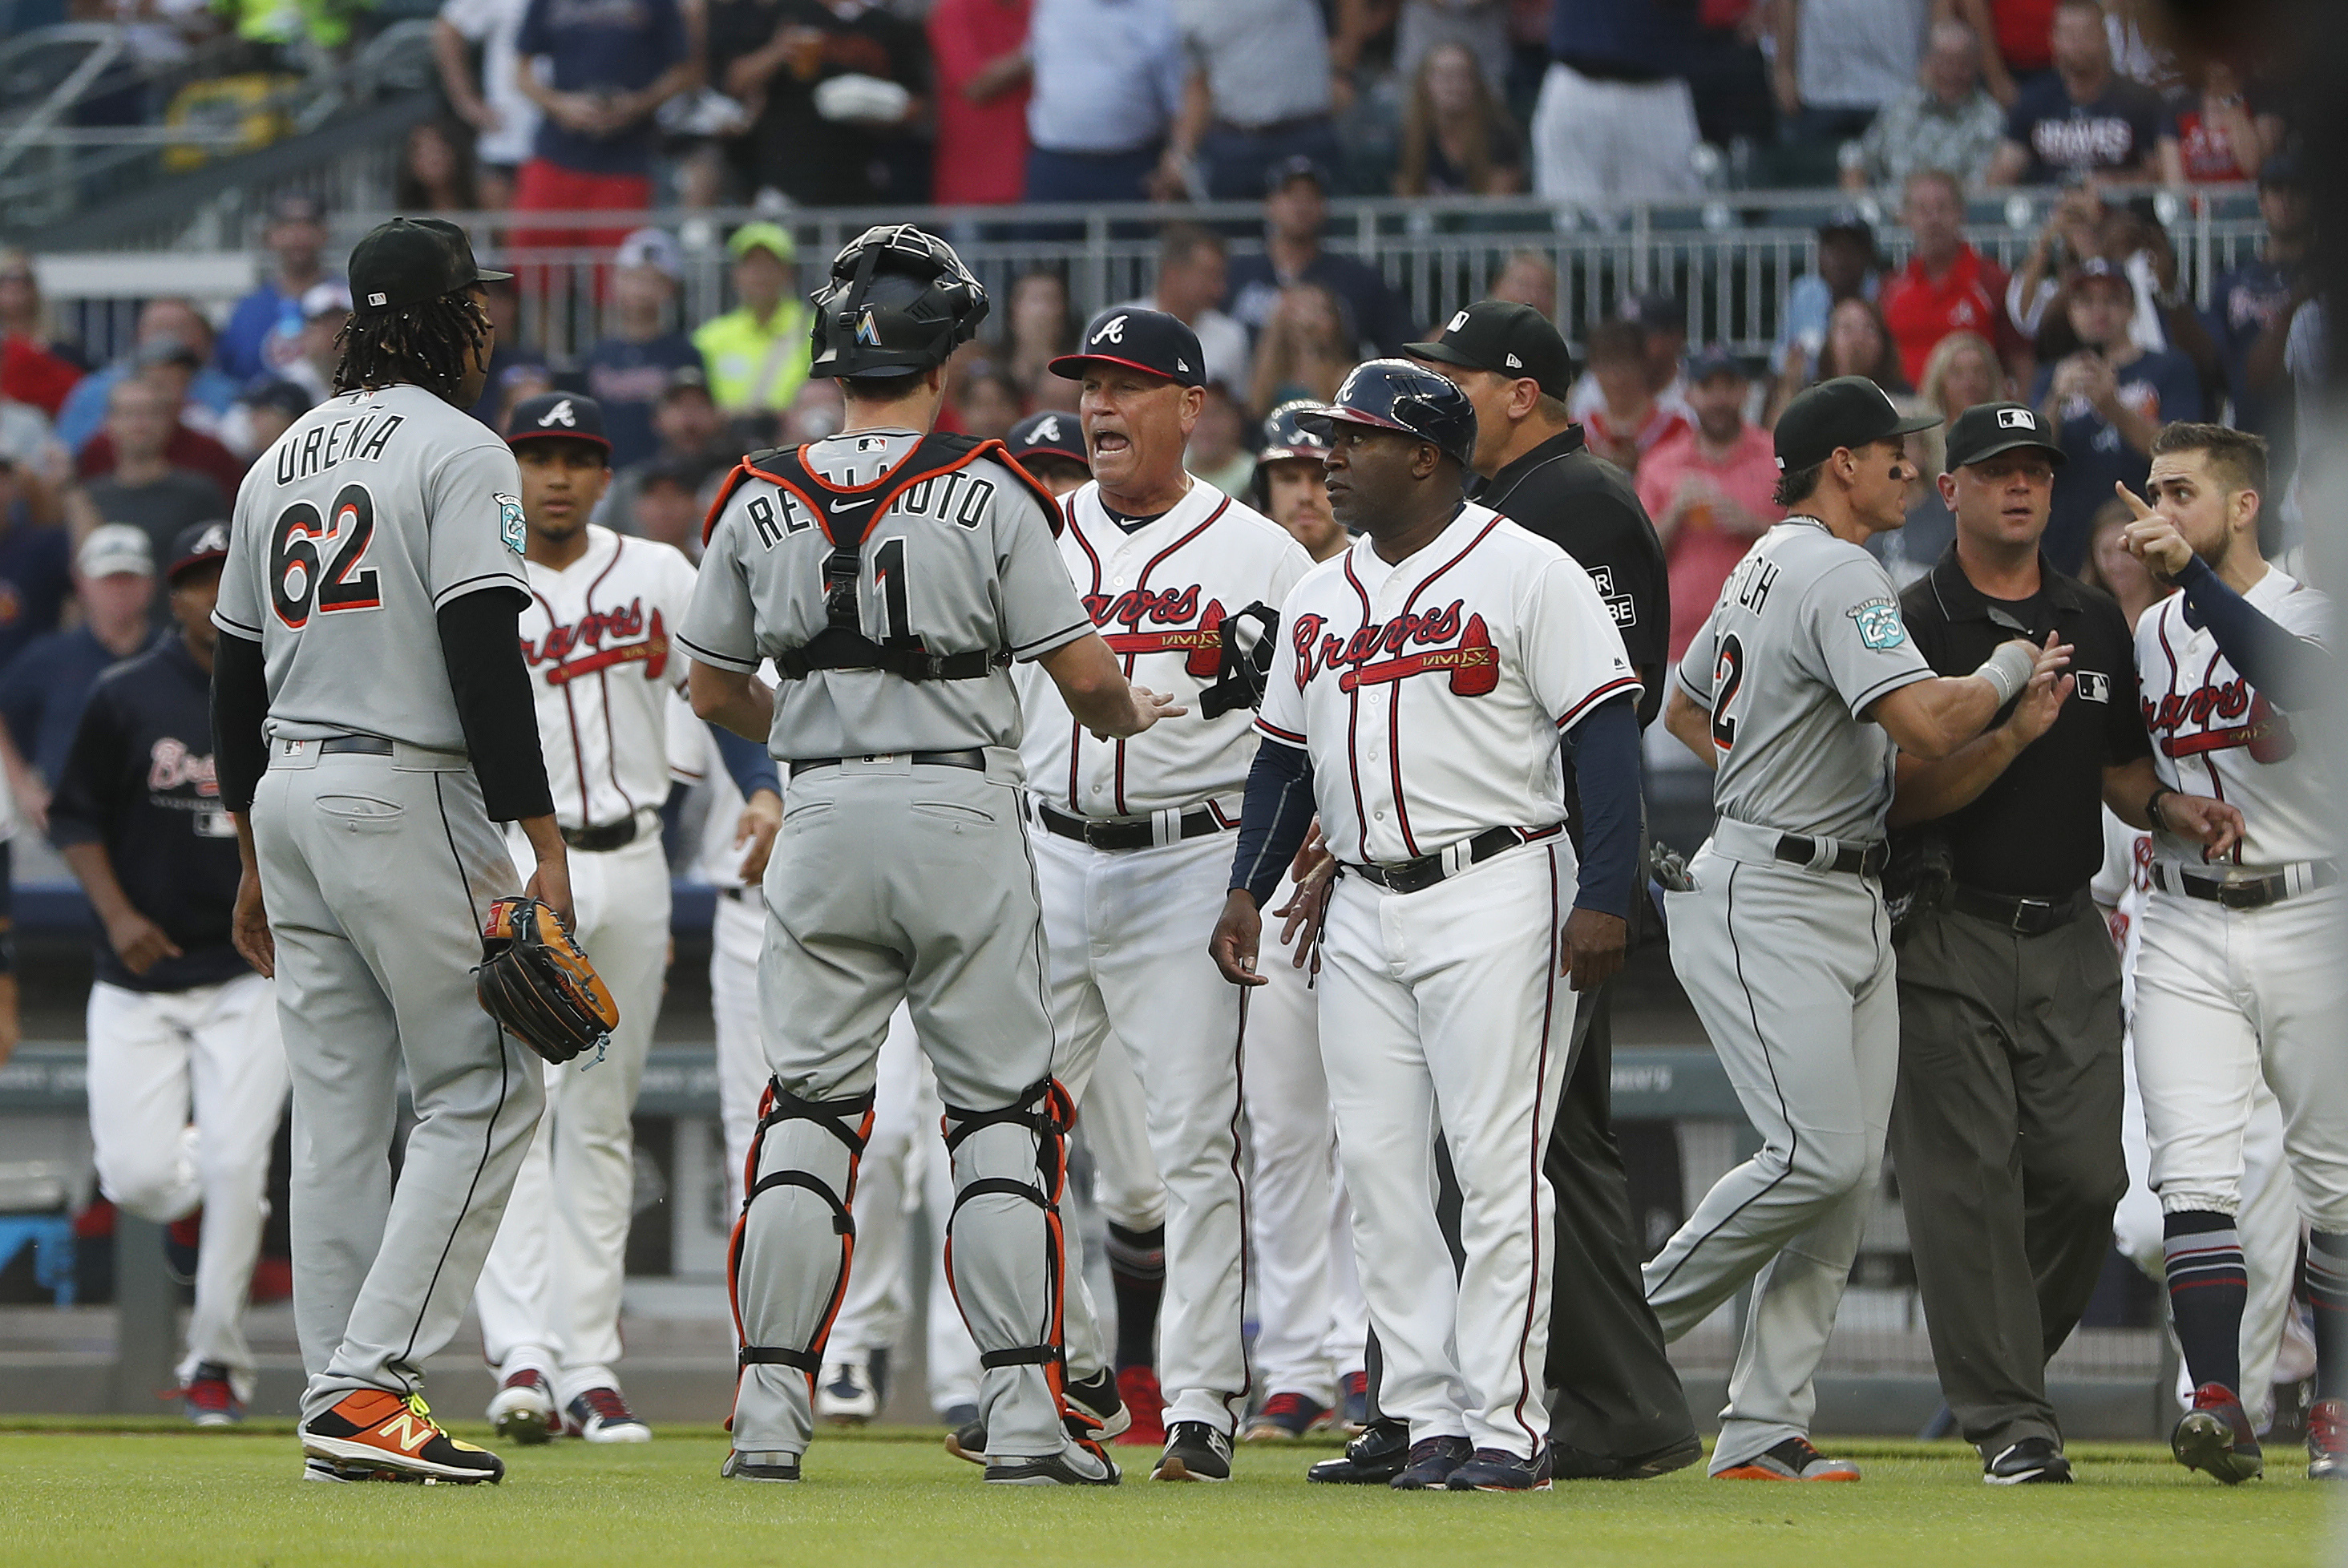 Braves place Ronald Acuña Jr. on 10-day injured list - Battery Power